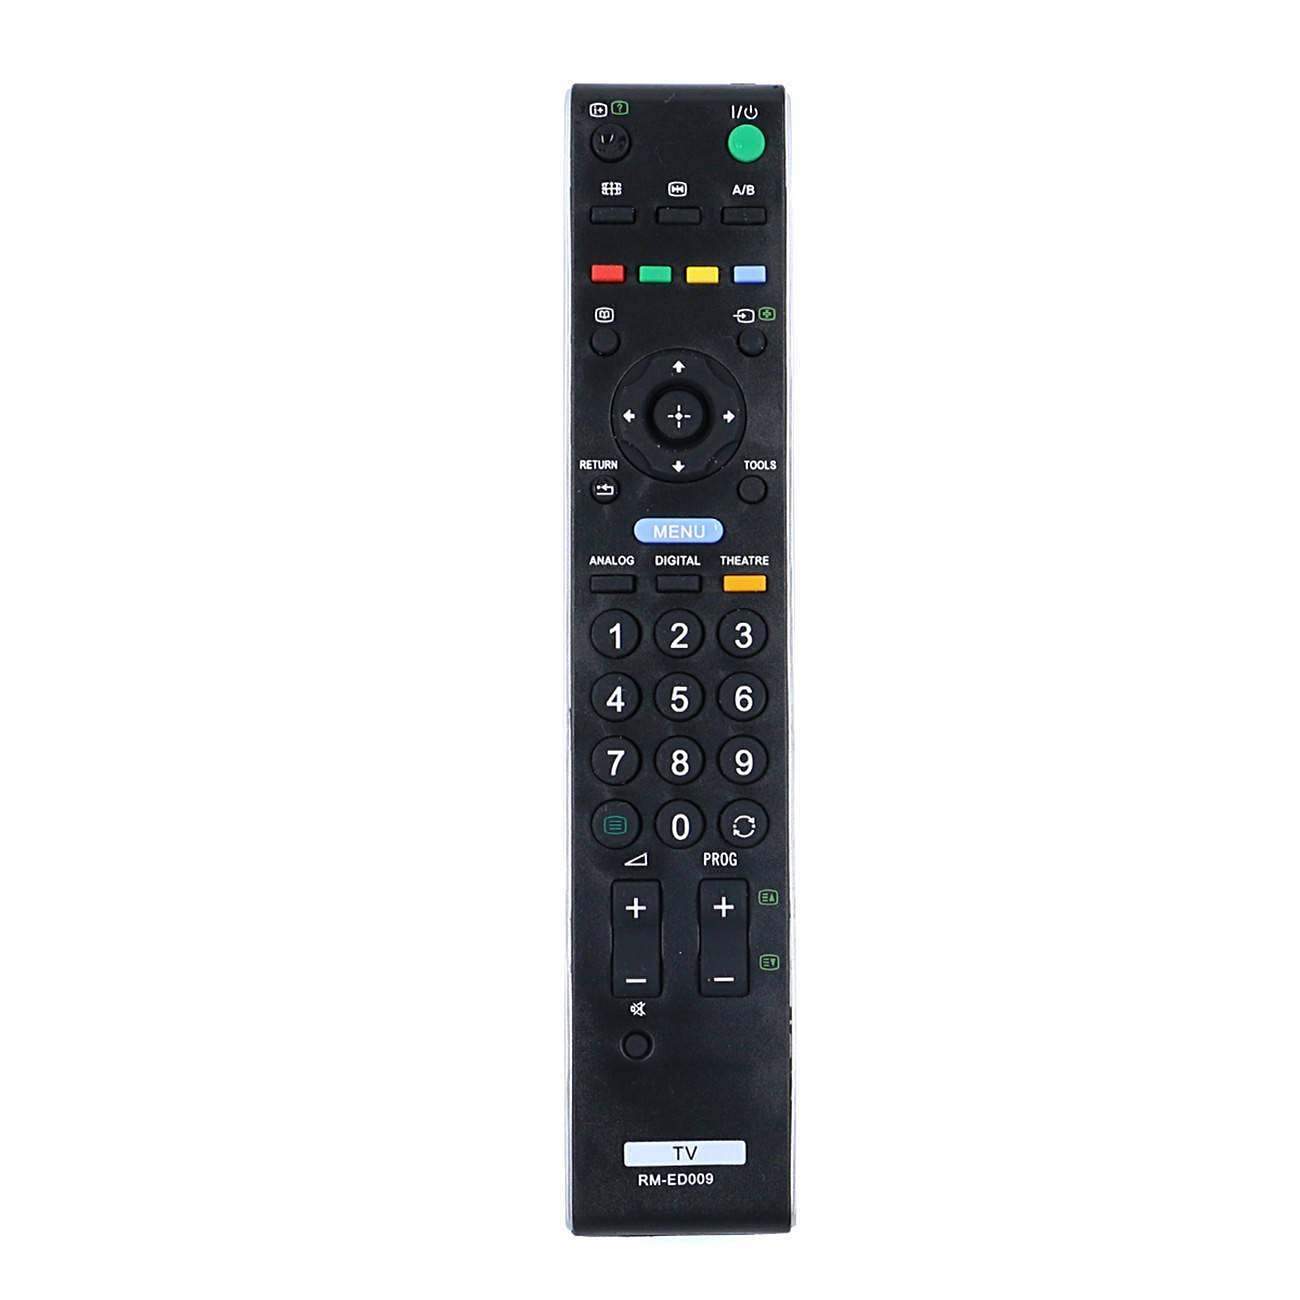 RM-ED009 Replacement Remote Control for Sony Bravia TV KDL-19S5710 KDL-19S5720